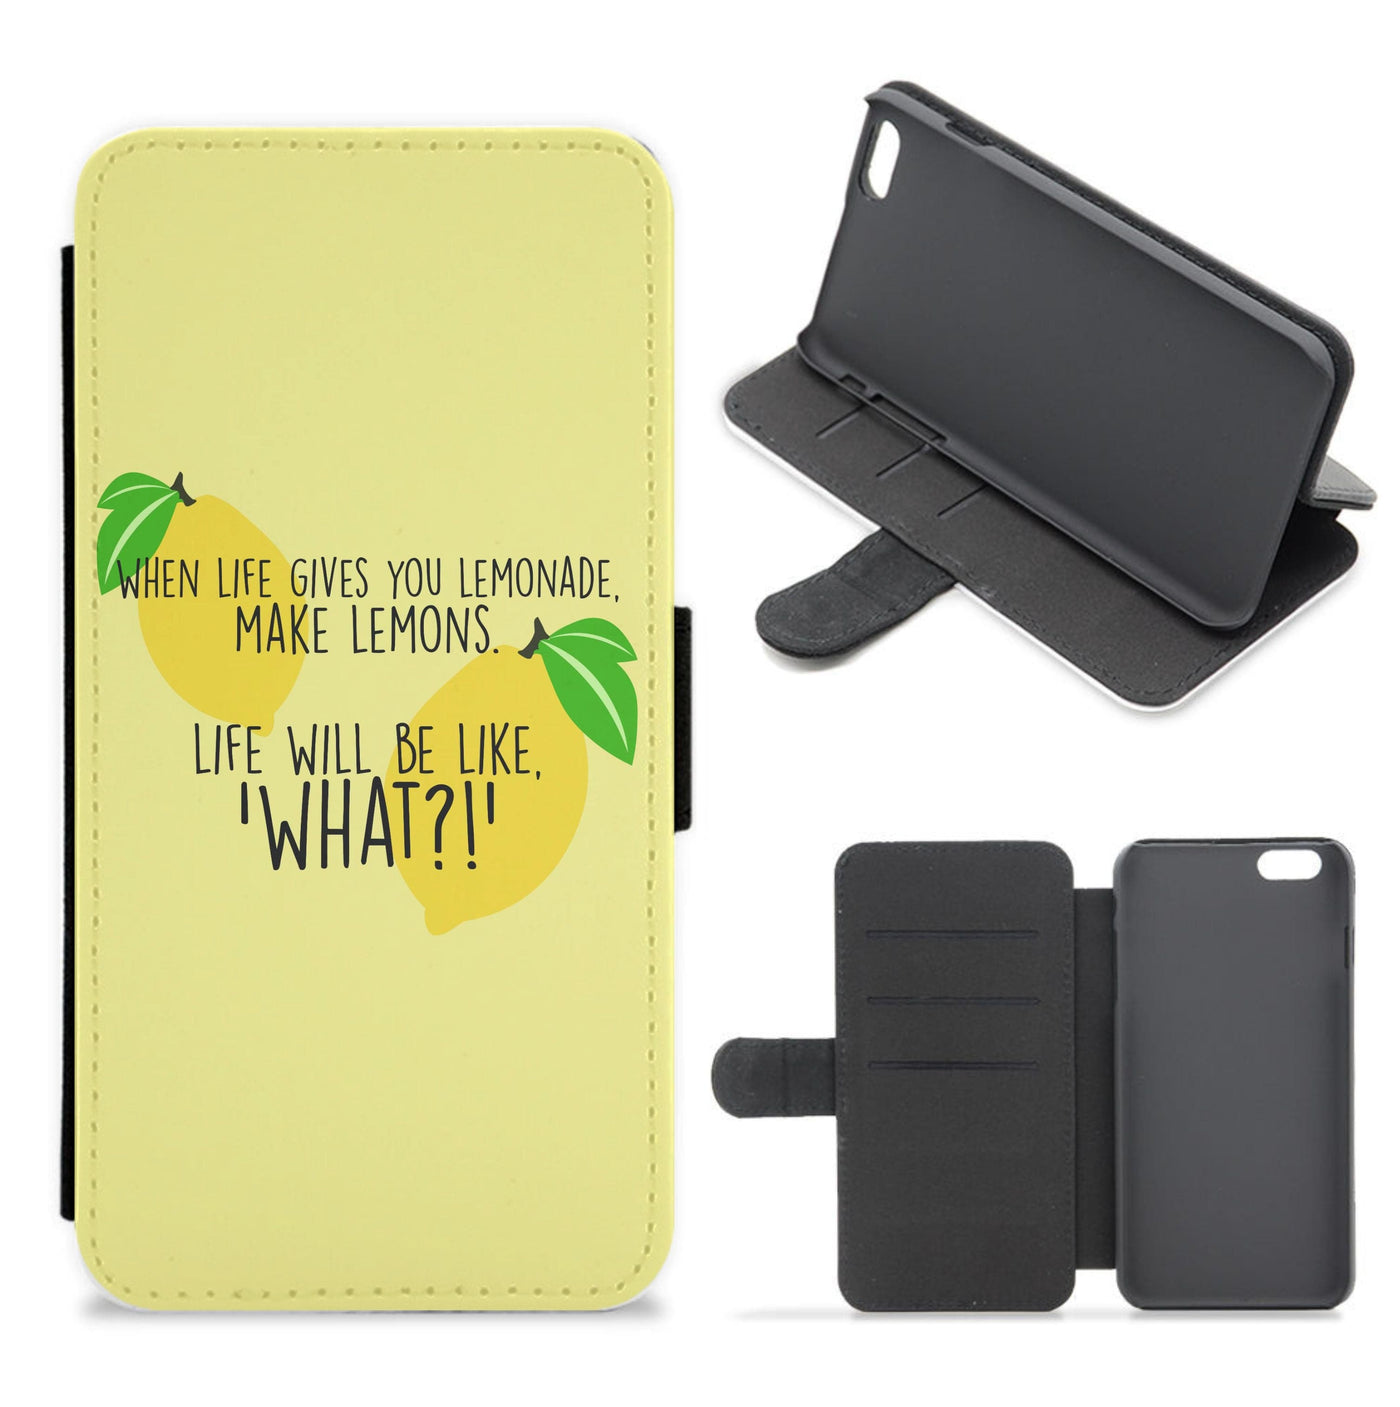 When Life Gives You Lemonade - TV Quotes Flip / Wallet Phone Case